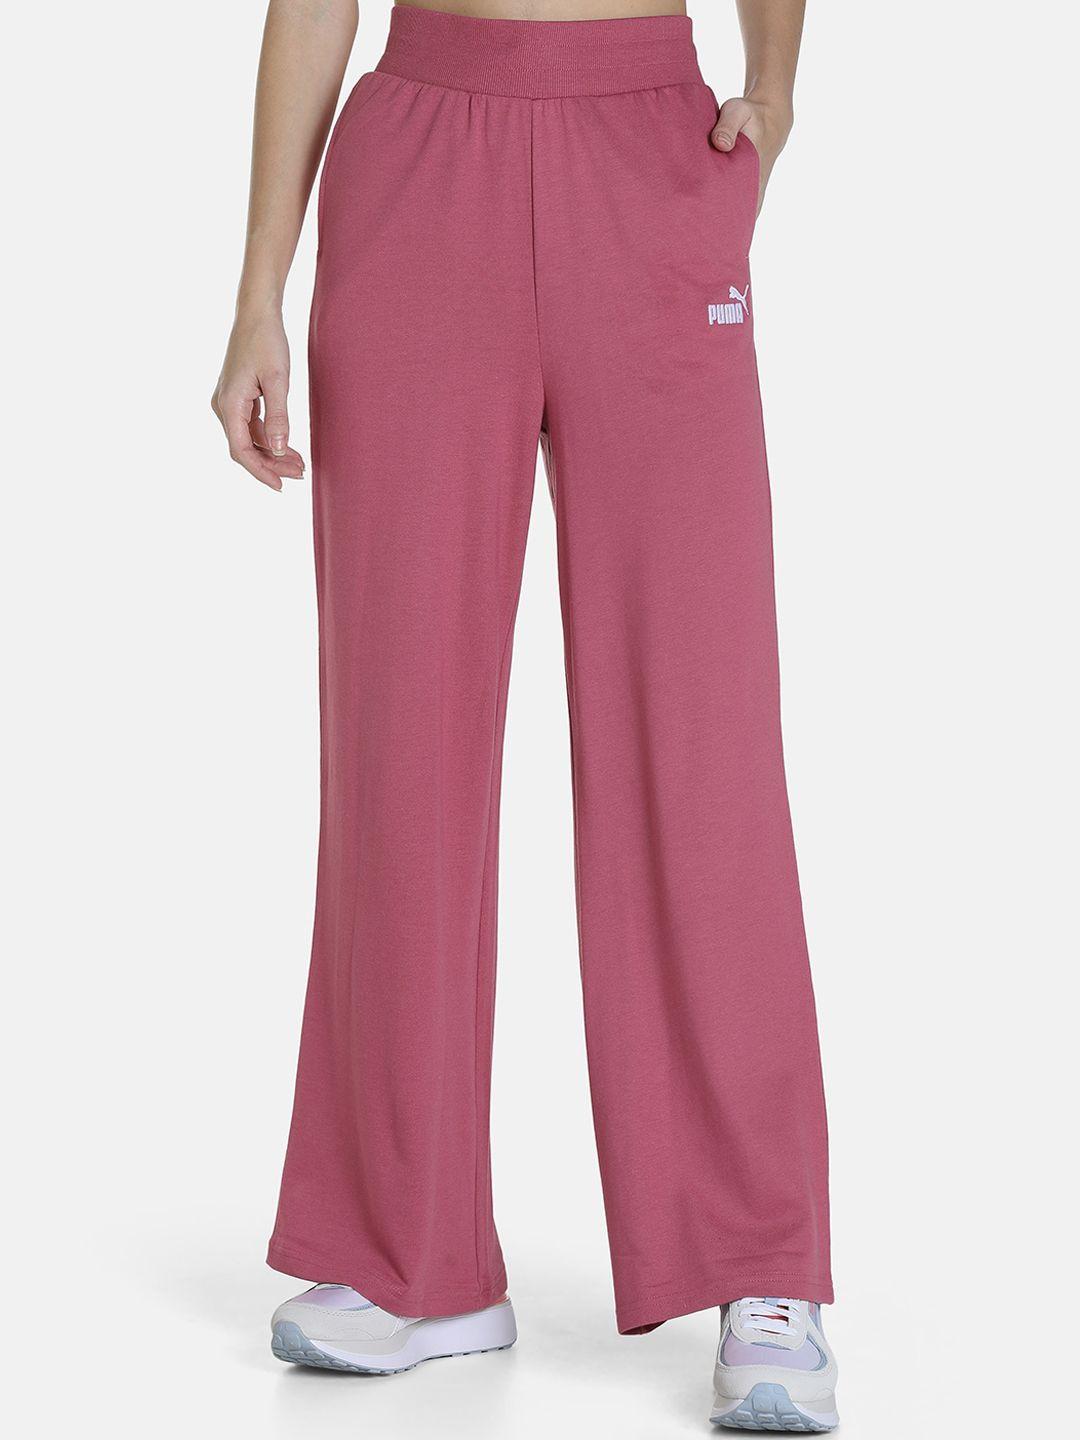 puma-women-solid-relaxed-fit-pure-cotton-track-pants